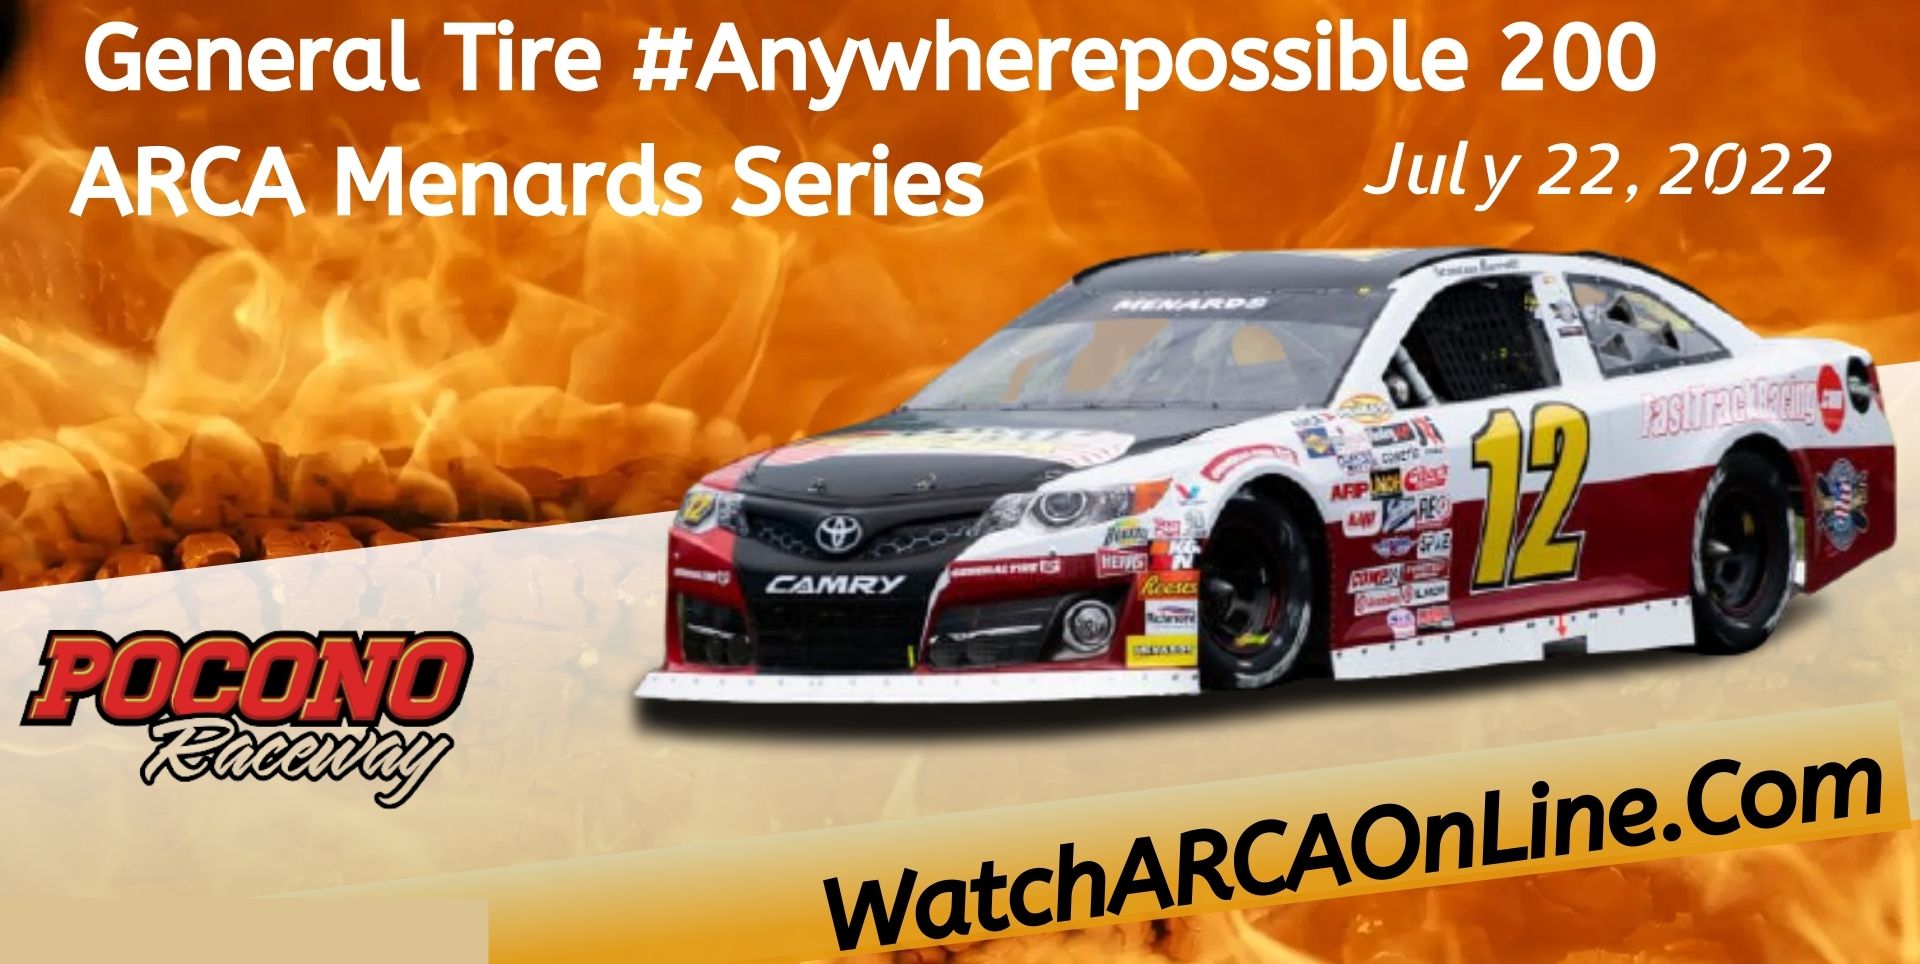 General Tire #Anywherepossible 200 Live Stream 2022